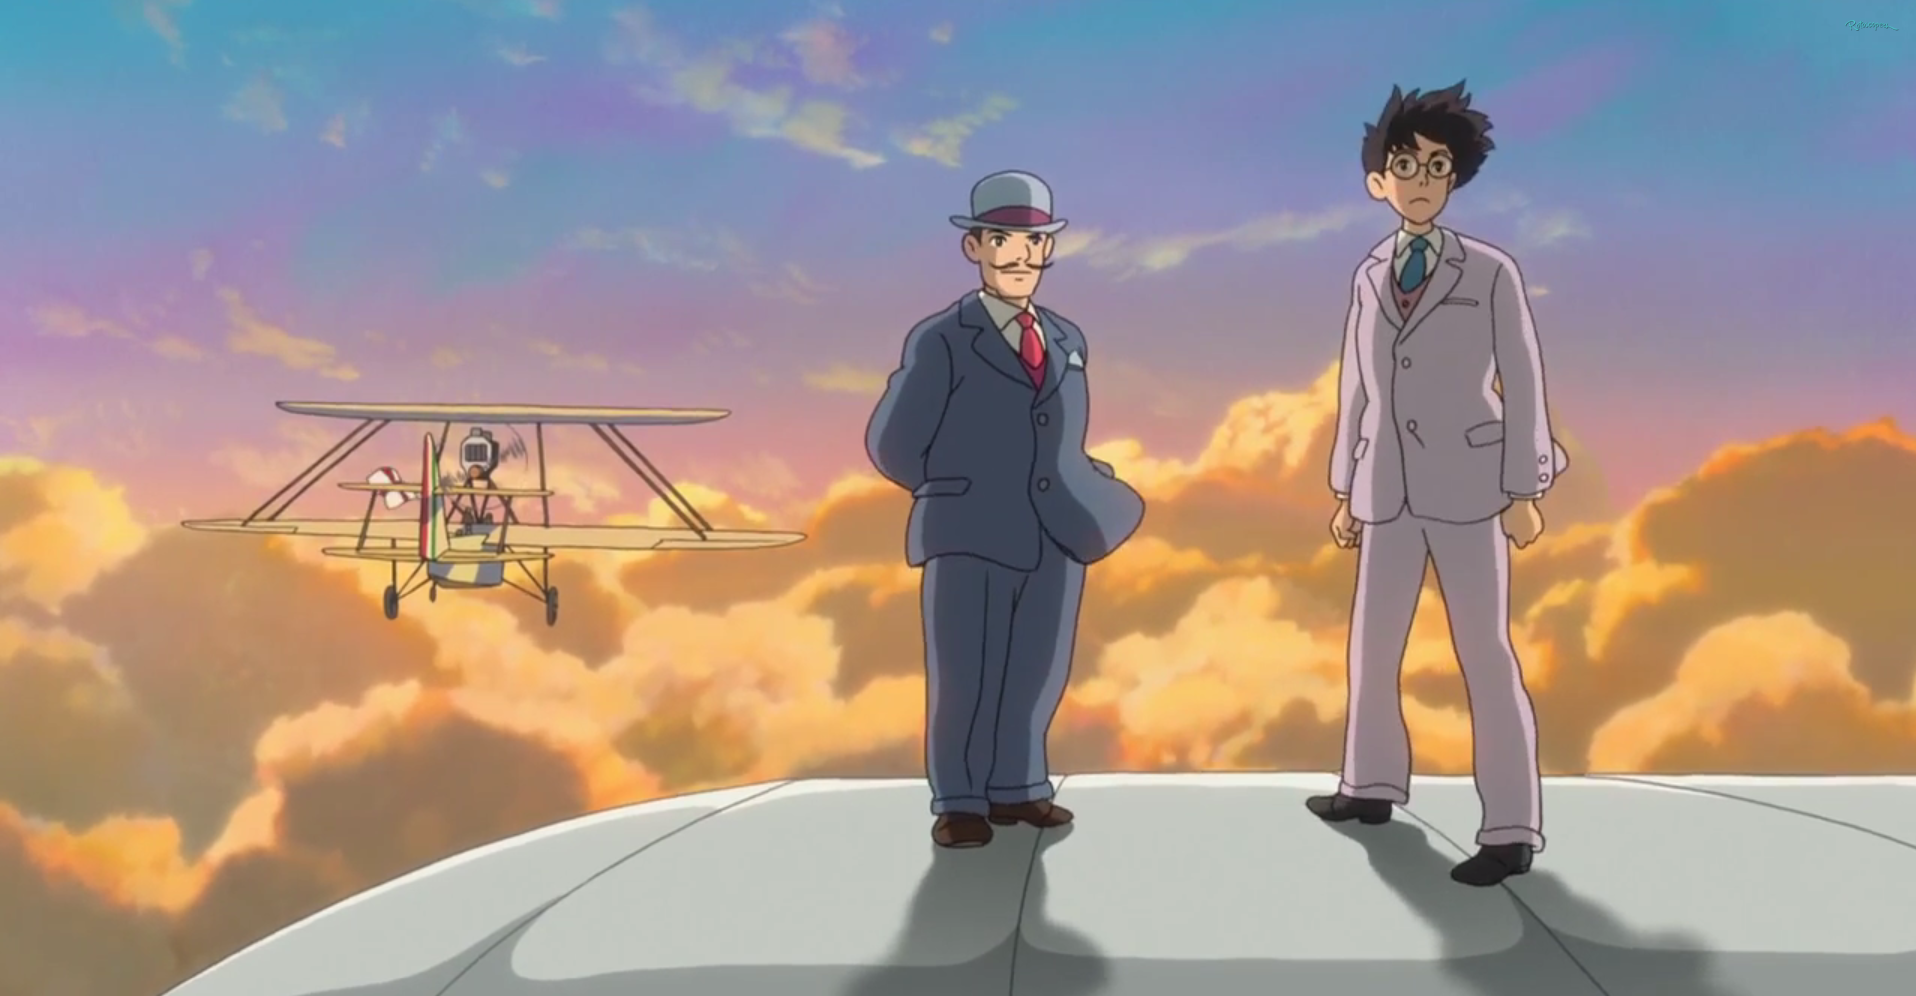 HQ The Wind Rises Wallpapers | File 2036.54Kb